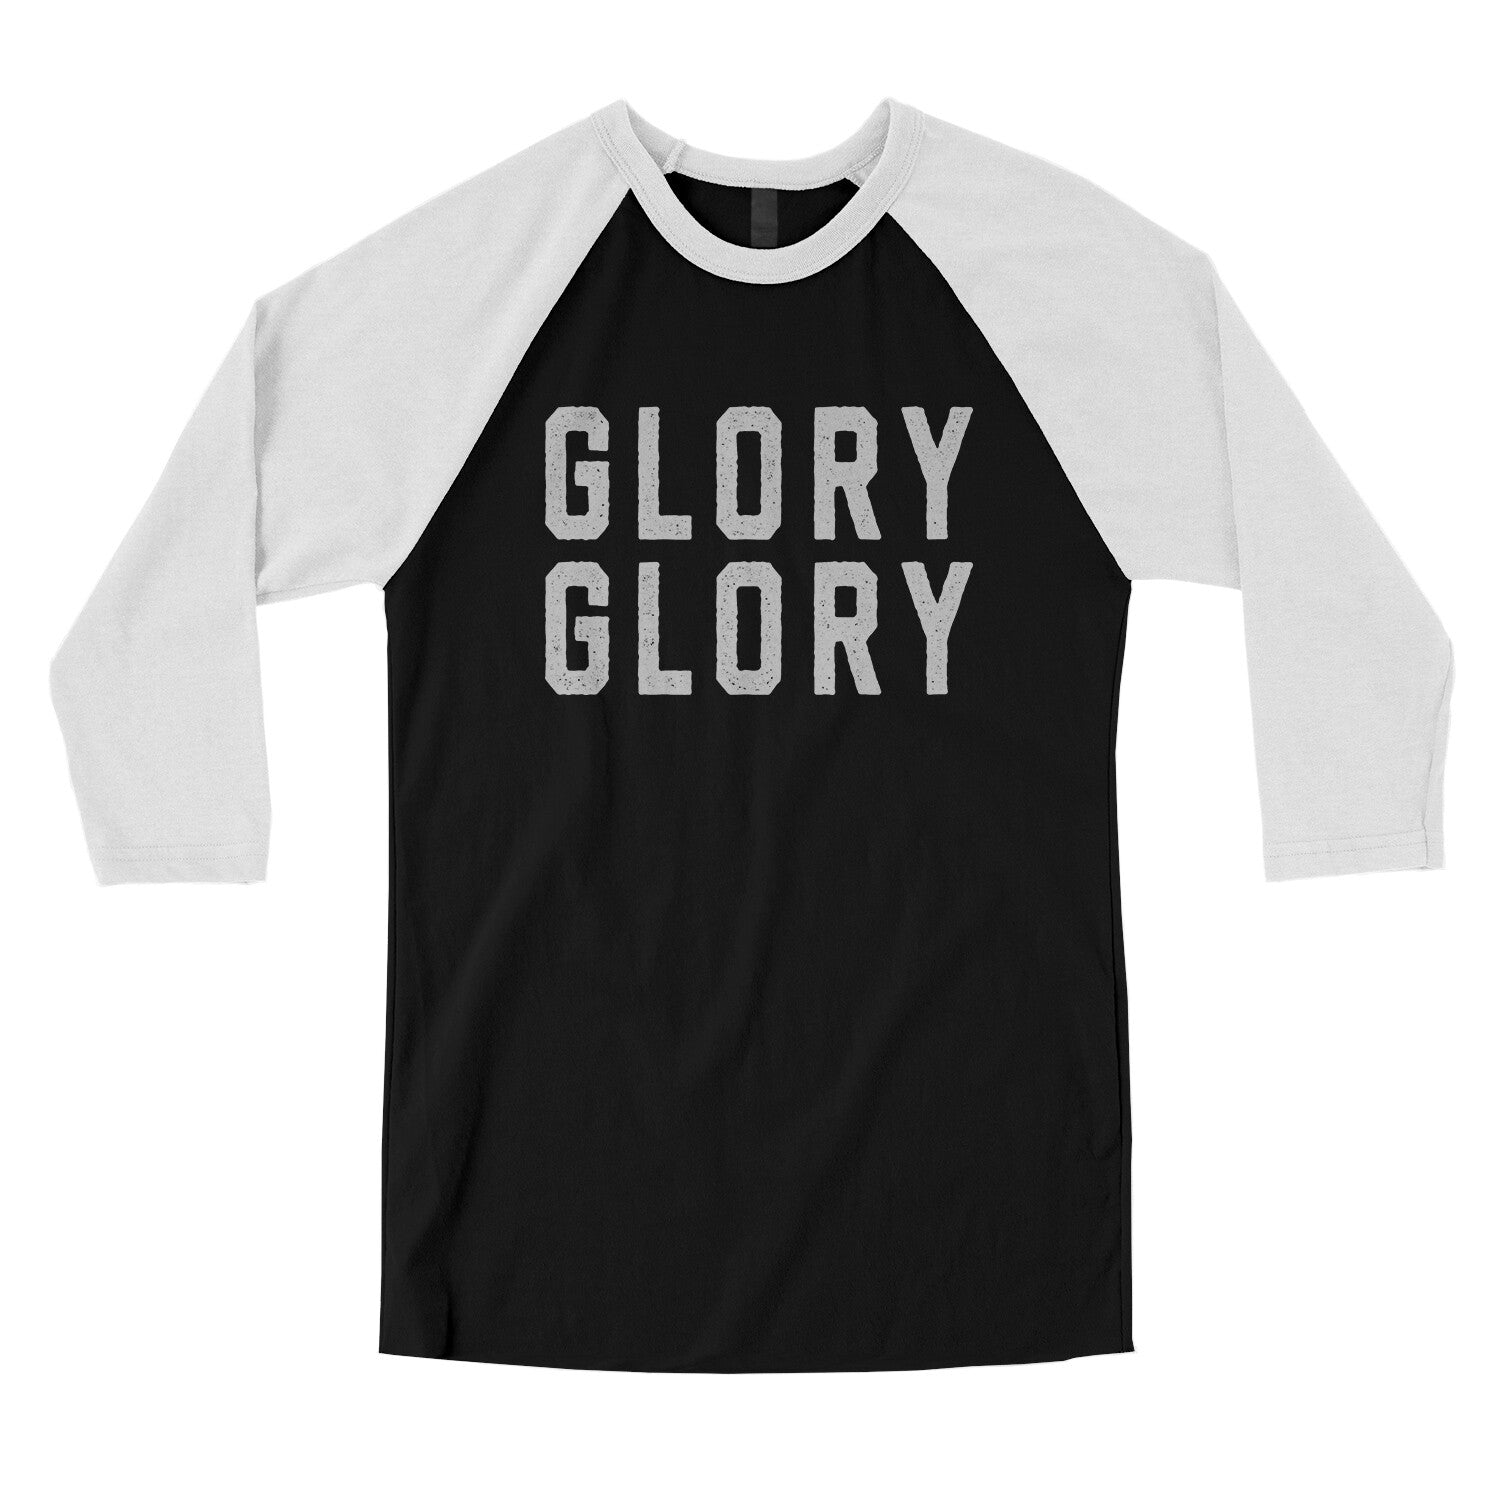 Glory Glory in Black with White Color